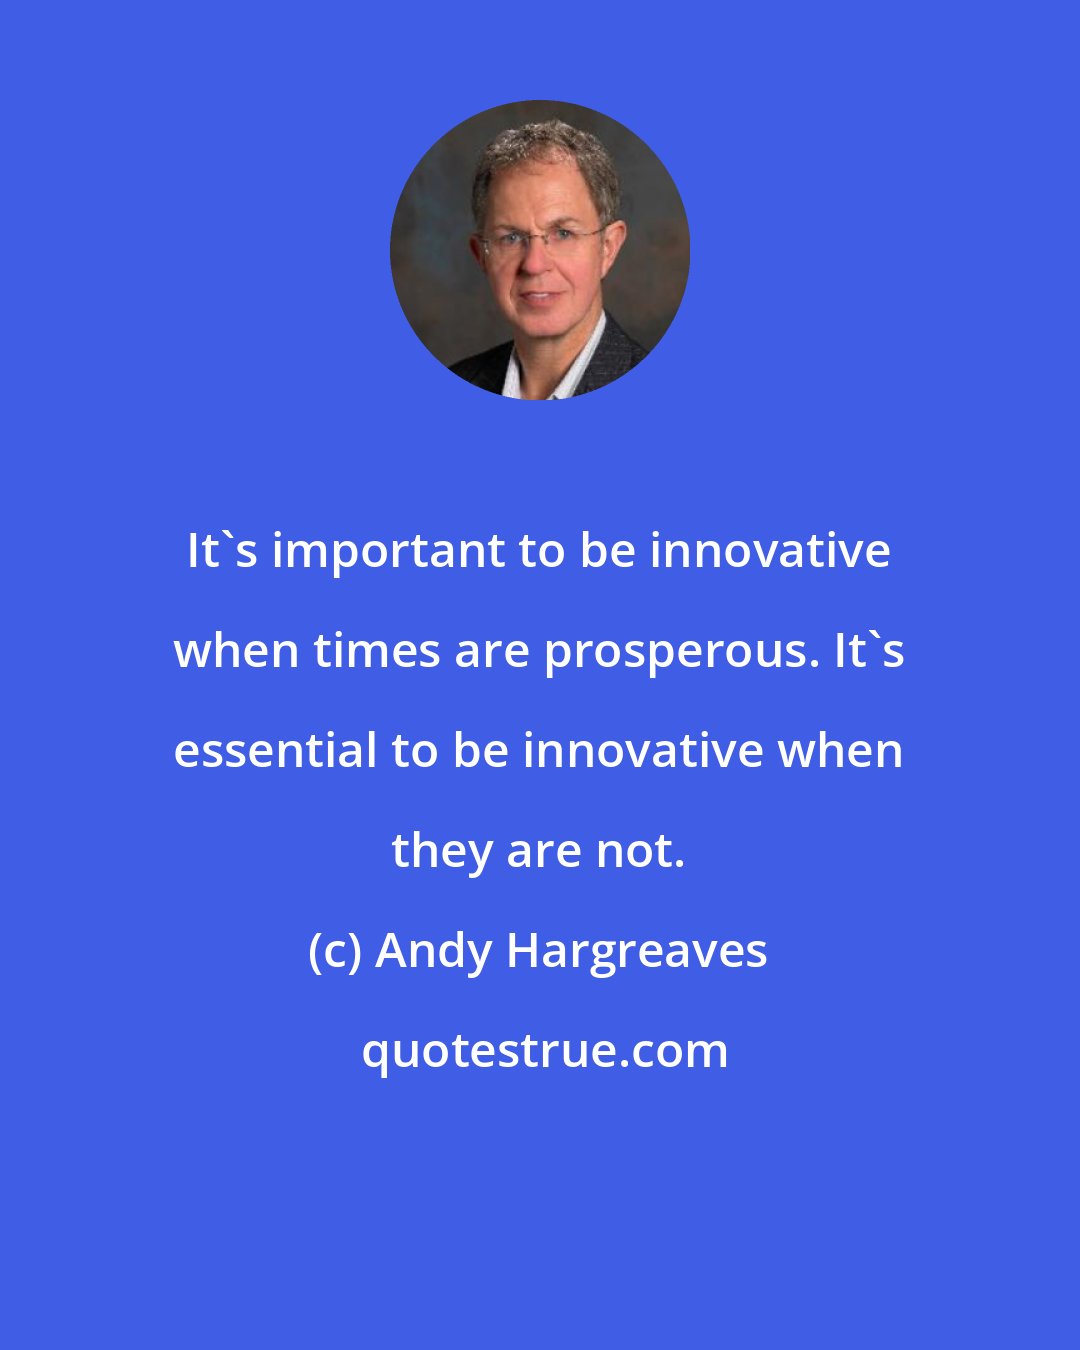 Andy Hargreaves: It's important to be innovative when times are prosperous. It's essential to be innovative when they are not.